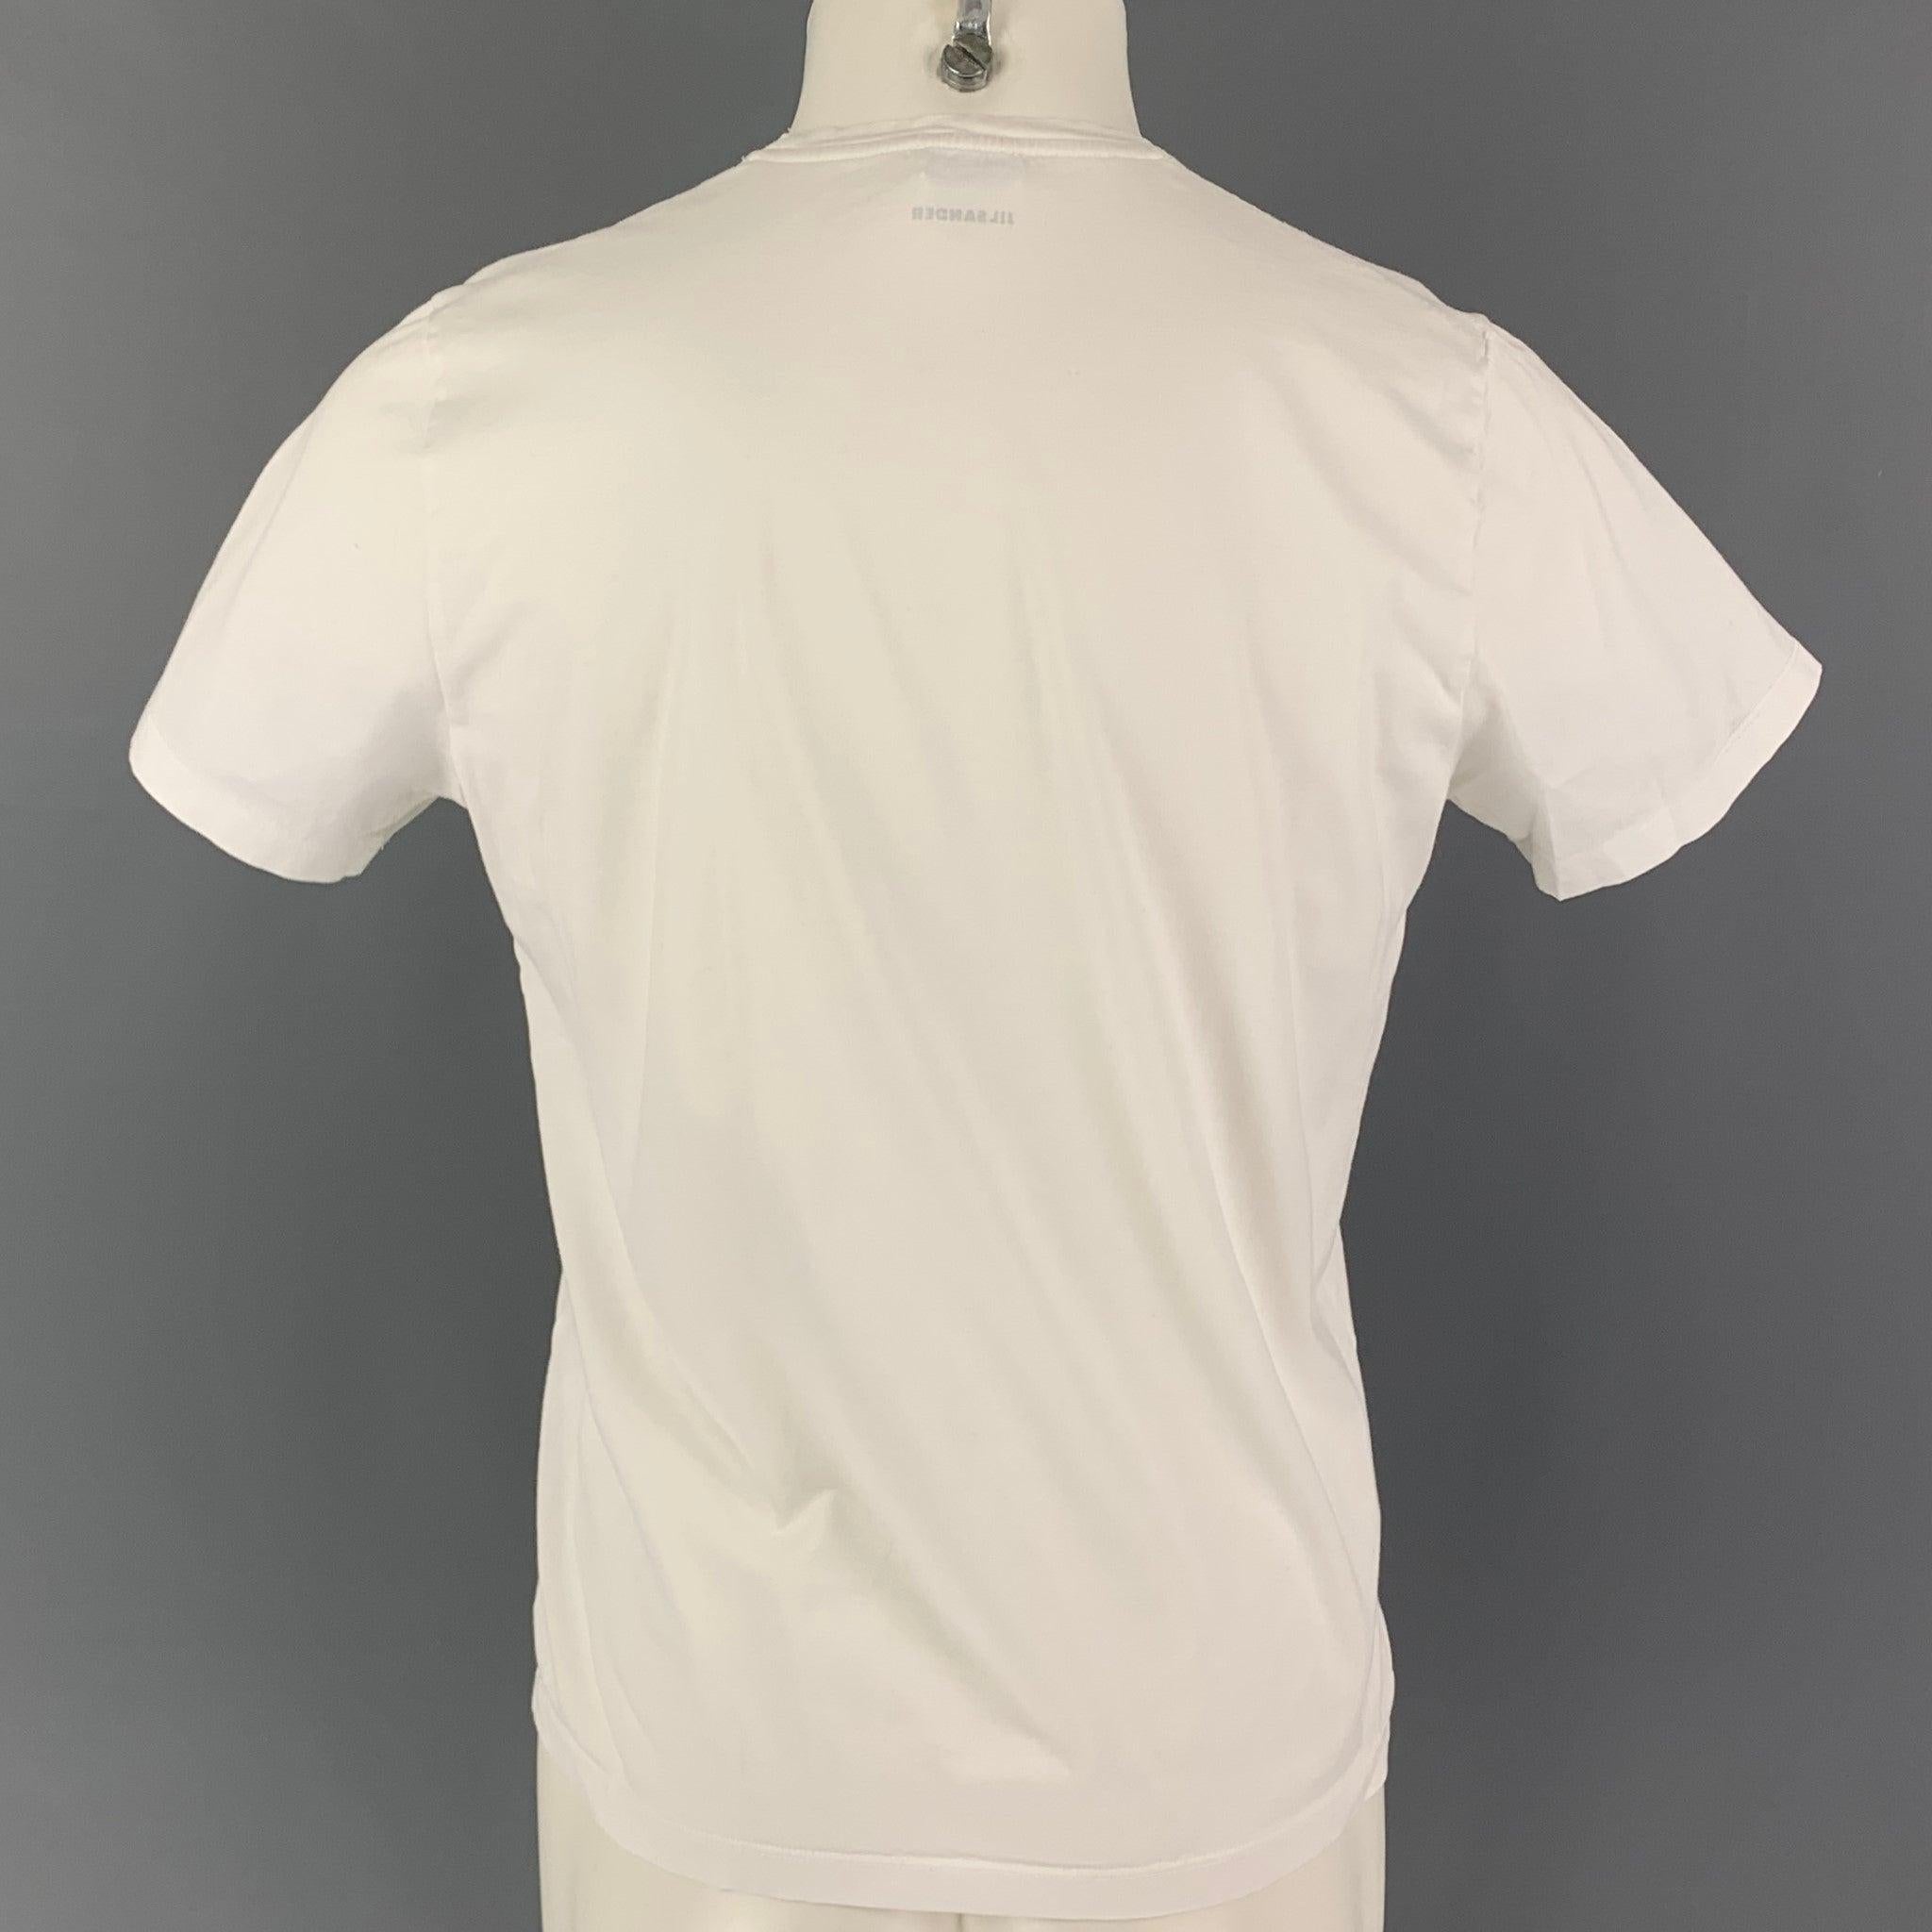 JIL SANDER Size XL White Cotton Crew-Neck T-shirt In Good Condition For Sale In San Francisco, CA